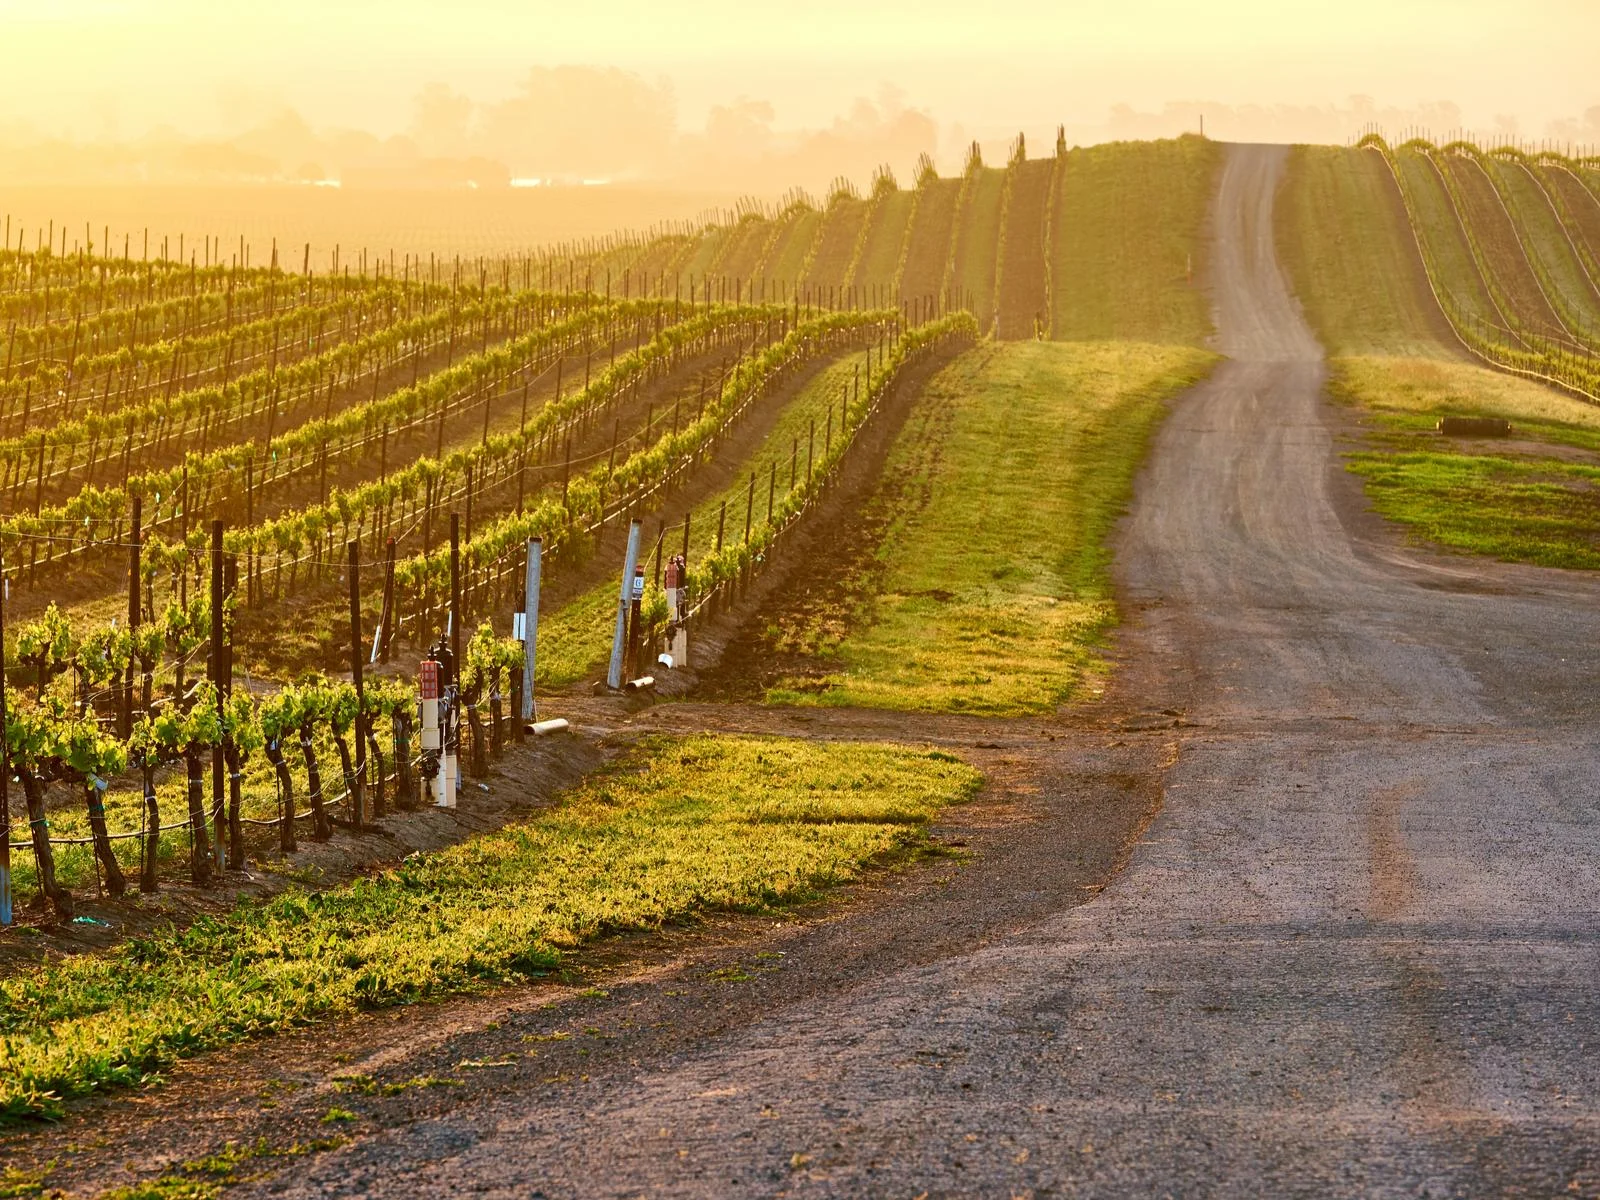 Vineyards on rolling hills under a sunrise during the best overall time to visit Napa Valley